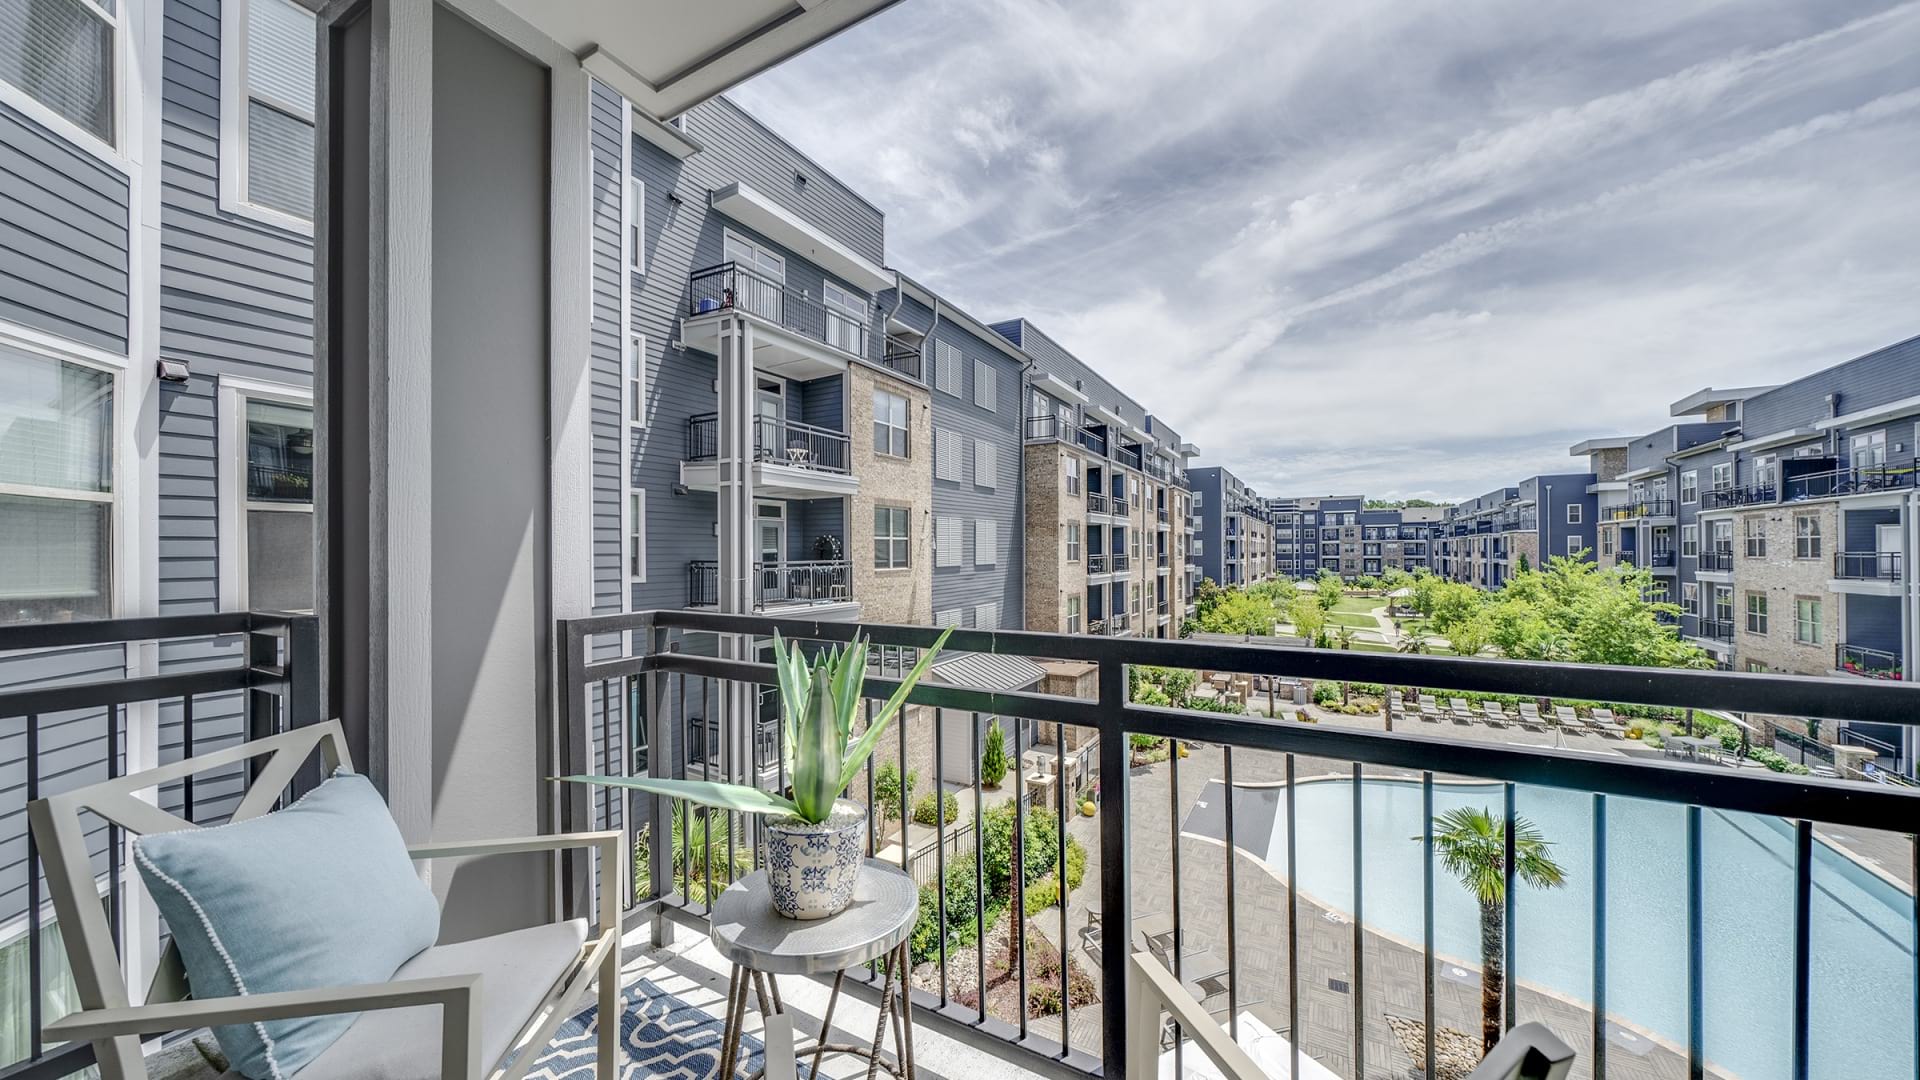 Our Raleigh luxury apartments with balcony and pool view